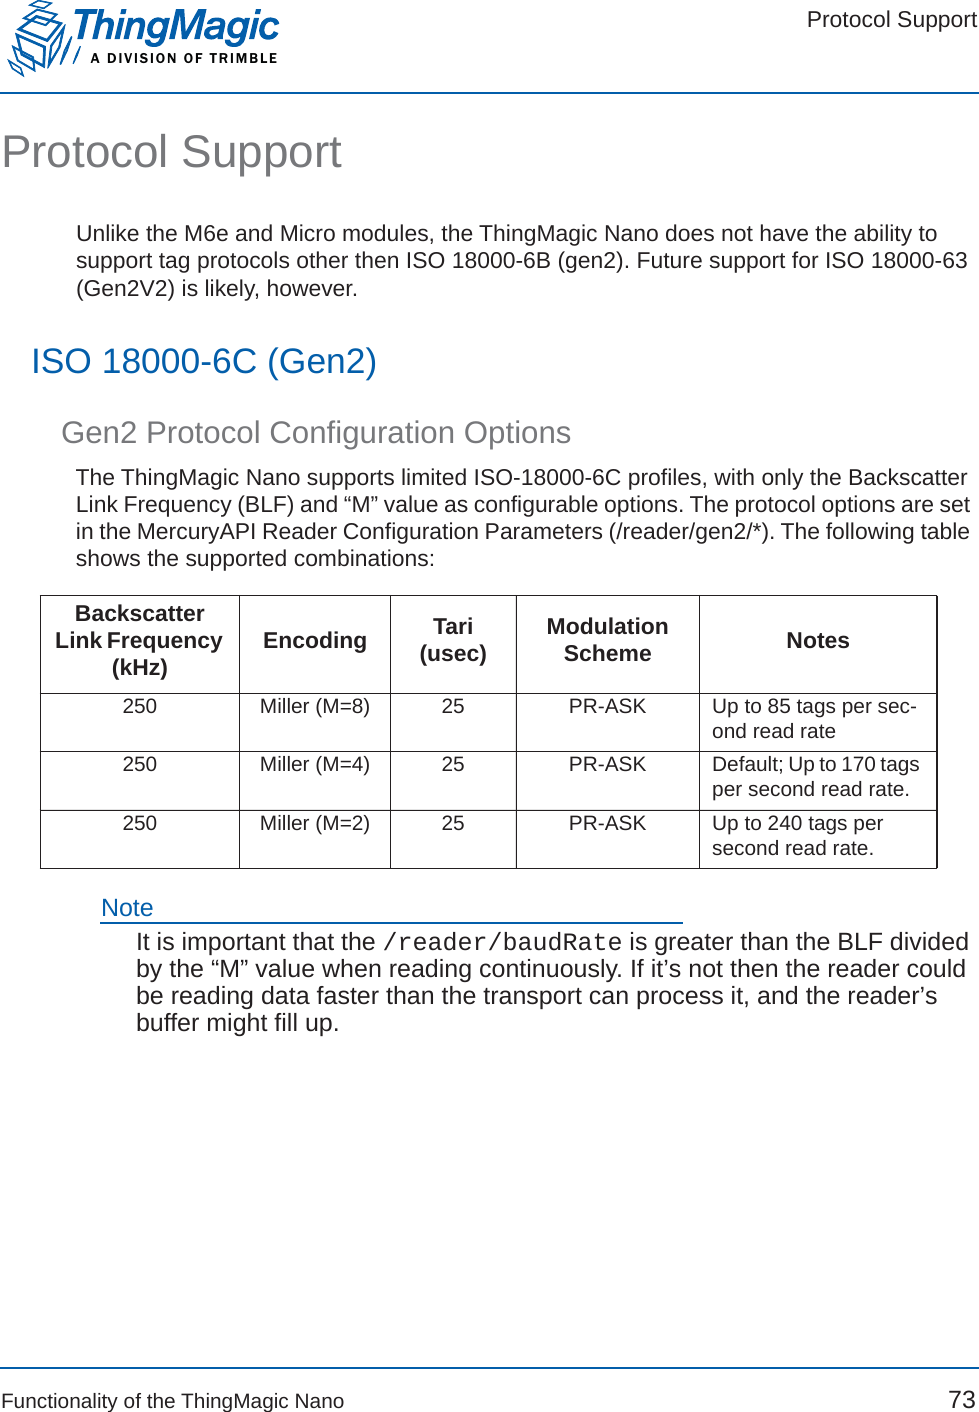 Protocol SupportA DIVISION OF TRIMBLEFunctionality of the ThingMagic Nano 73Protocol SupportUnlike the M6e and Micro modules, the ThingMagic Nano does not have the ability to support tag protocols other then ISO 18000-6B (gen2). Future support for ISO 18000-63 (Gen2V2) is likely, however.ISO 18000-6C (Gen2)Gen2 Protocol Configuration OptionsThe ThingMagic Nano supports limited ISO-18000-6C profiles, with only the Backscatter Link Frequency (BLF) and “M” value as configurable options. The protocol options are set in the MercuryAPI Reader Configuration Parameters (/reader/gen2/*). The following table shows the supported combinations:NoteIt is important that the /reader/baudRate is greater than the BLF divided by the “M” value when reading continuously. If it’s not then the reader could be reading data faster than the transport can process it, and the reader’s buffer might fill up.BackscatterLink Frequency (kHz) Encoding Tari (usec) ModulationScheme Notes250 Miller (M=8) 25 PR-ASK Up to 85 tags per sec-ond read rate250 Miller (M=4) 25 PR-ASK Default; Up to 170 tags per second read rate.250 Miller (M=2) 25 PR-ASK Up to 240 tags per second read rate.